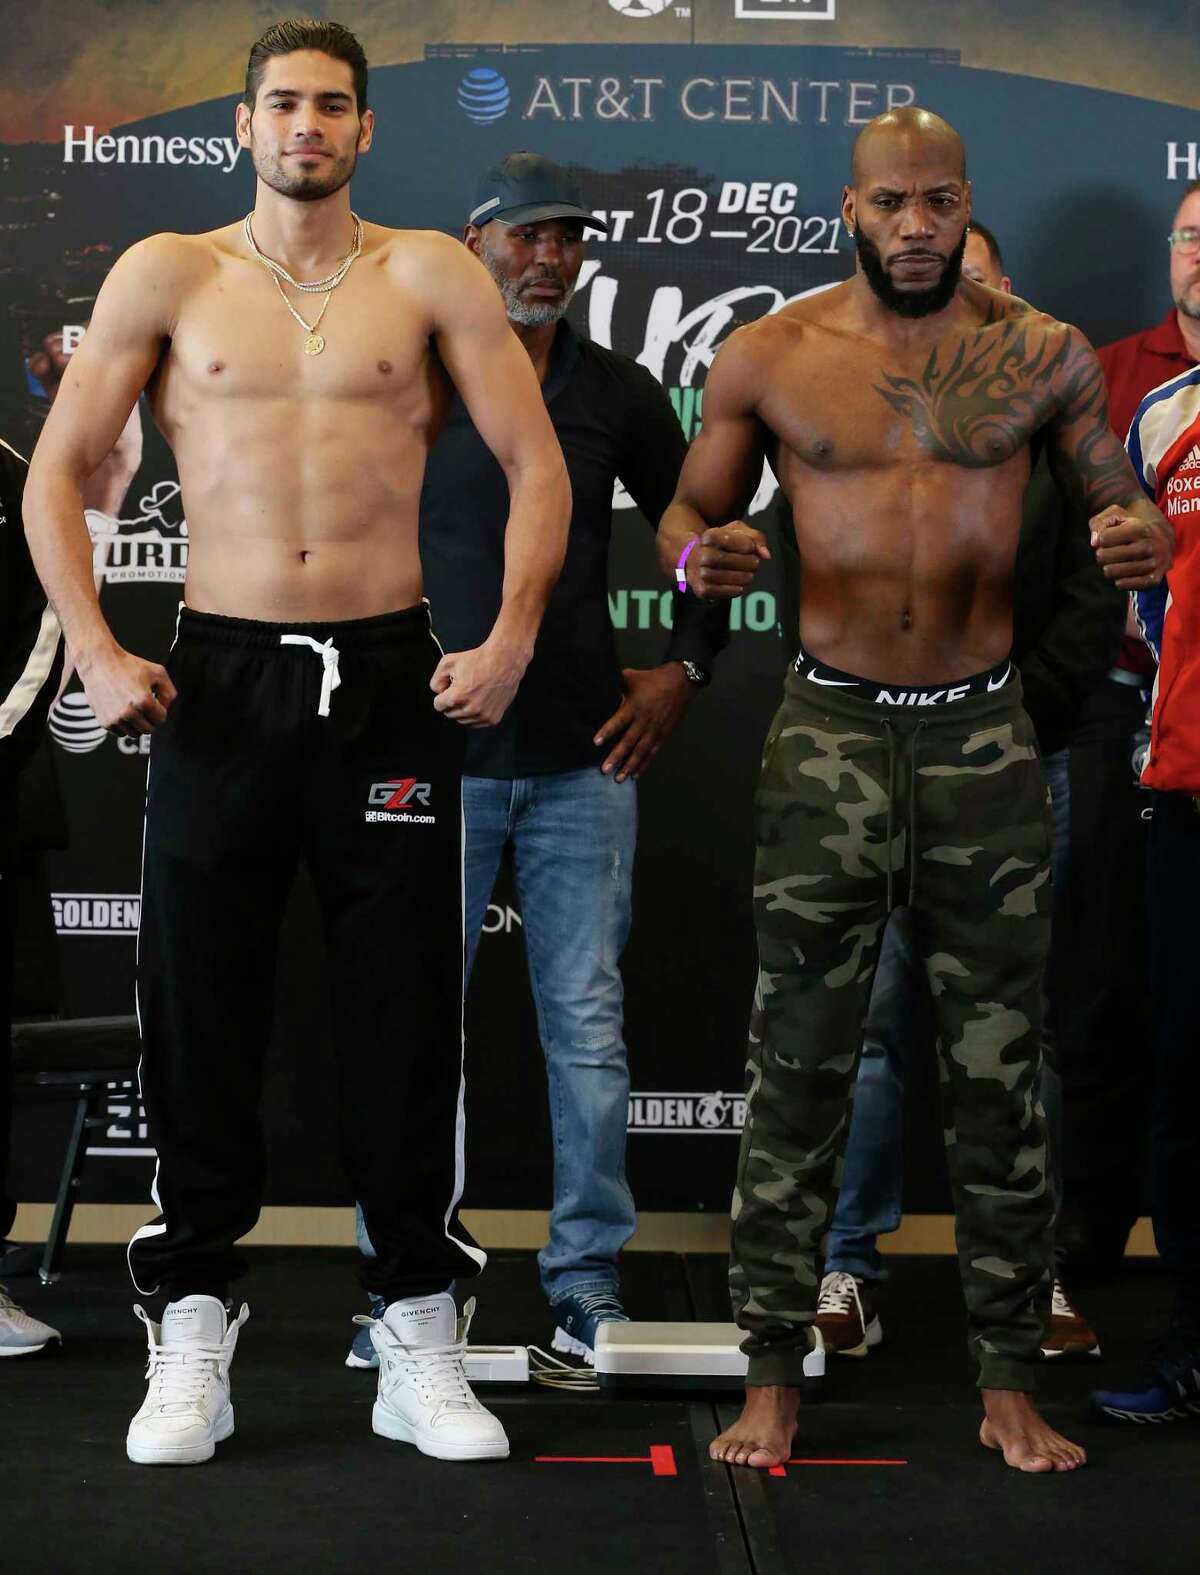 Gilberto ?’Zurdo?“ Ramirez, left, of Mazatlan, Mexico and Yunieski Gonzalez, out of Miami, flex after weighing in at the Grand Hyatt, Friday, Dec. 17, 2021. They are the main event for Saturday?•s night boxing at the AT&T Center.